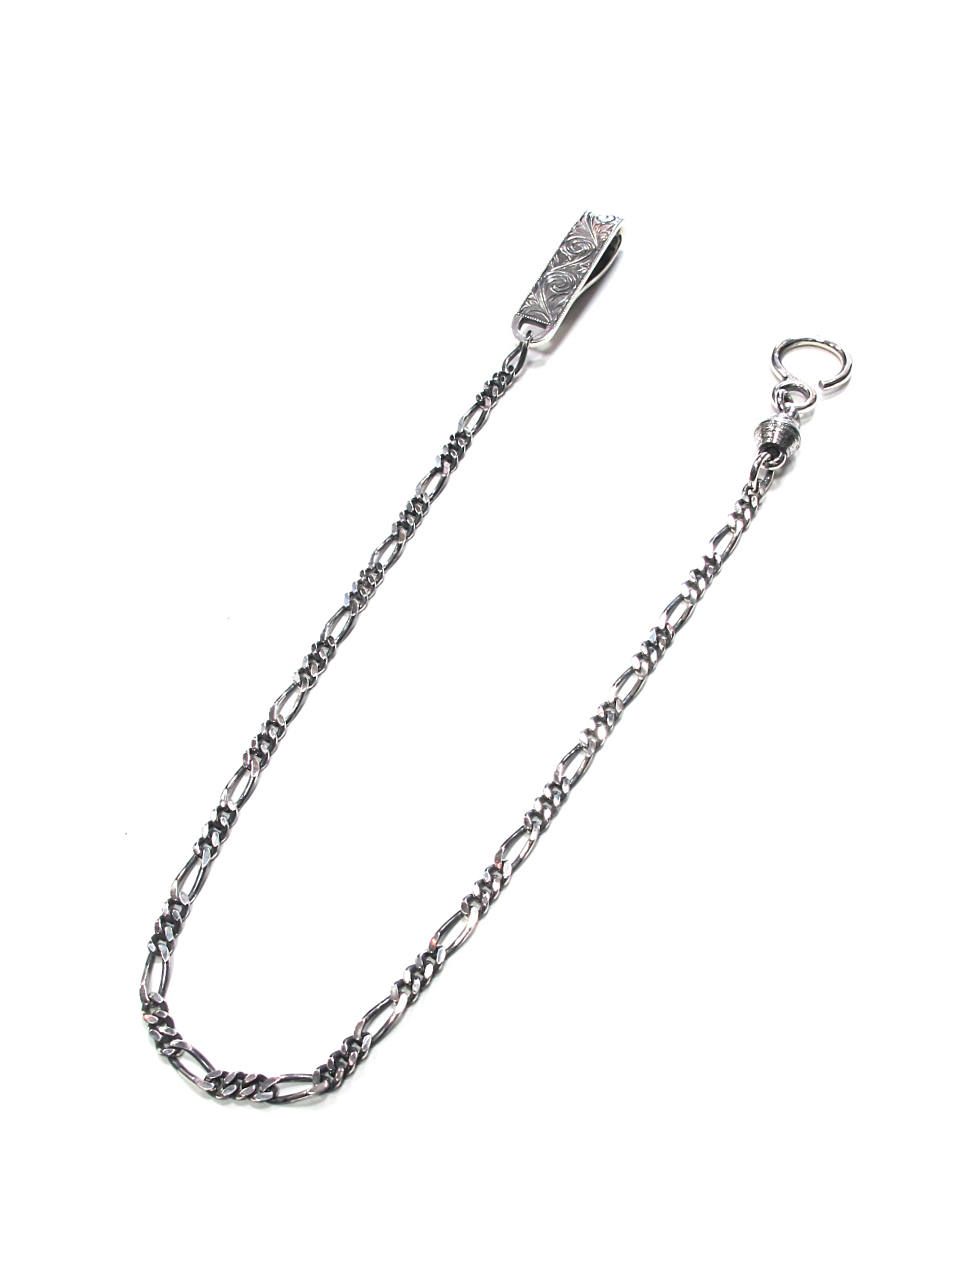 ANTIDOTE BUYERS CLUB - ENGRAVED NARROW WALLET CHAIN (SHORT 